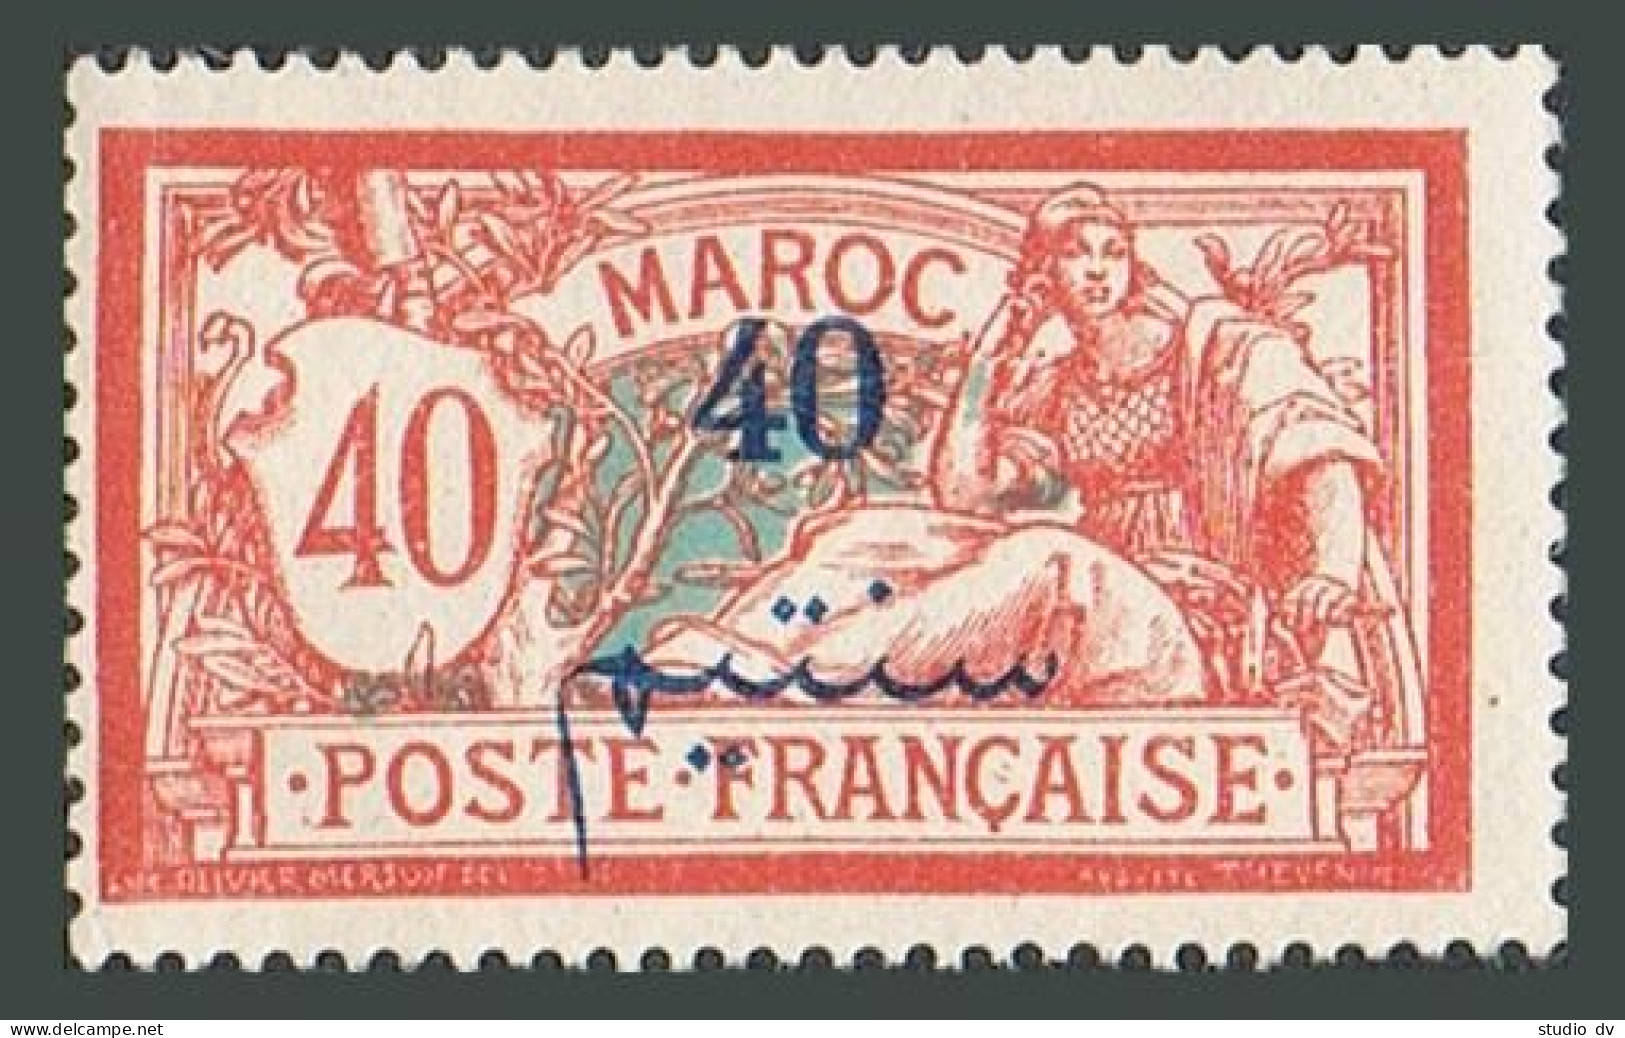 Fr Morocco 35,MNH.Michel 34. Offices In Morocco,40 Centimos Surcharged In Blue. - Morocco (1956-...)